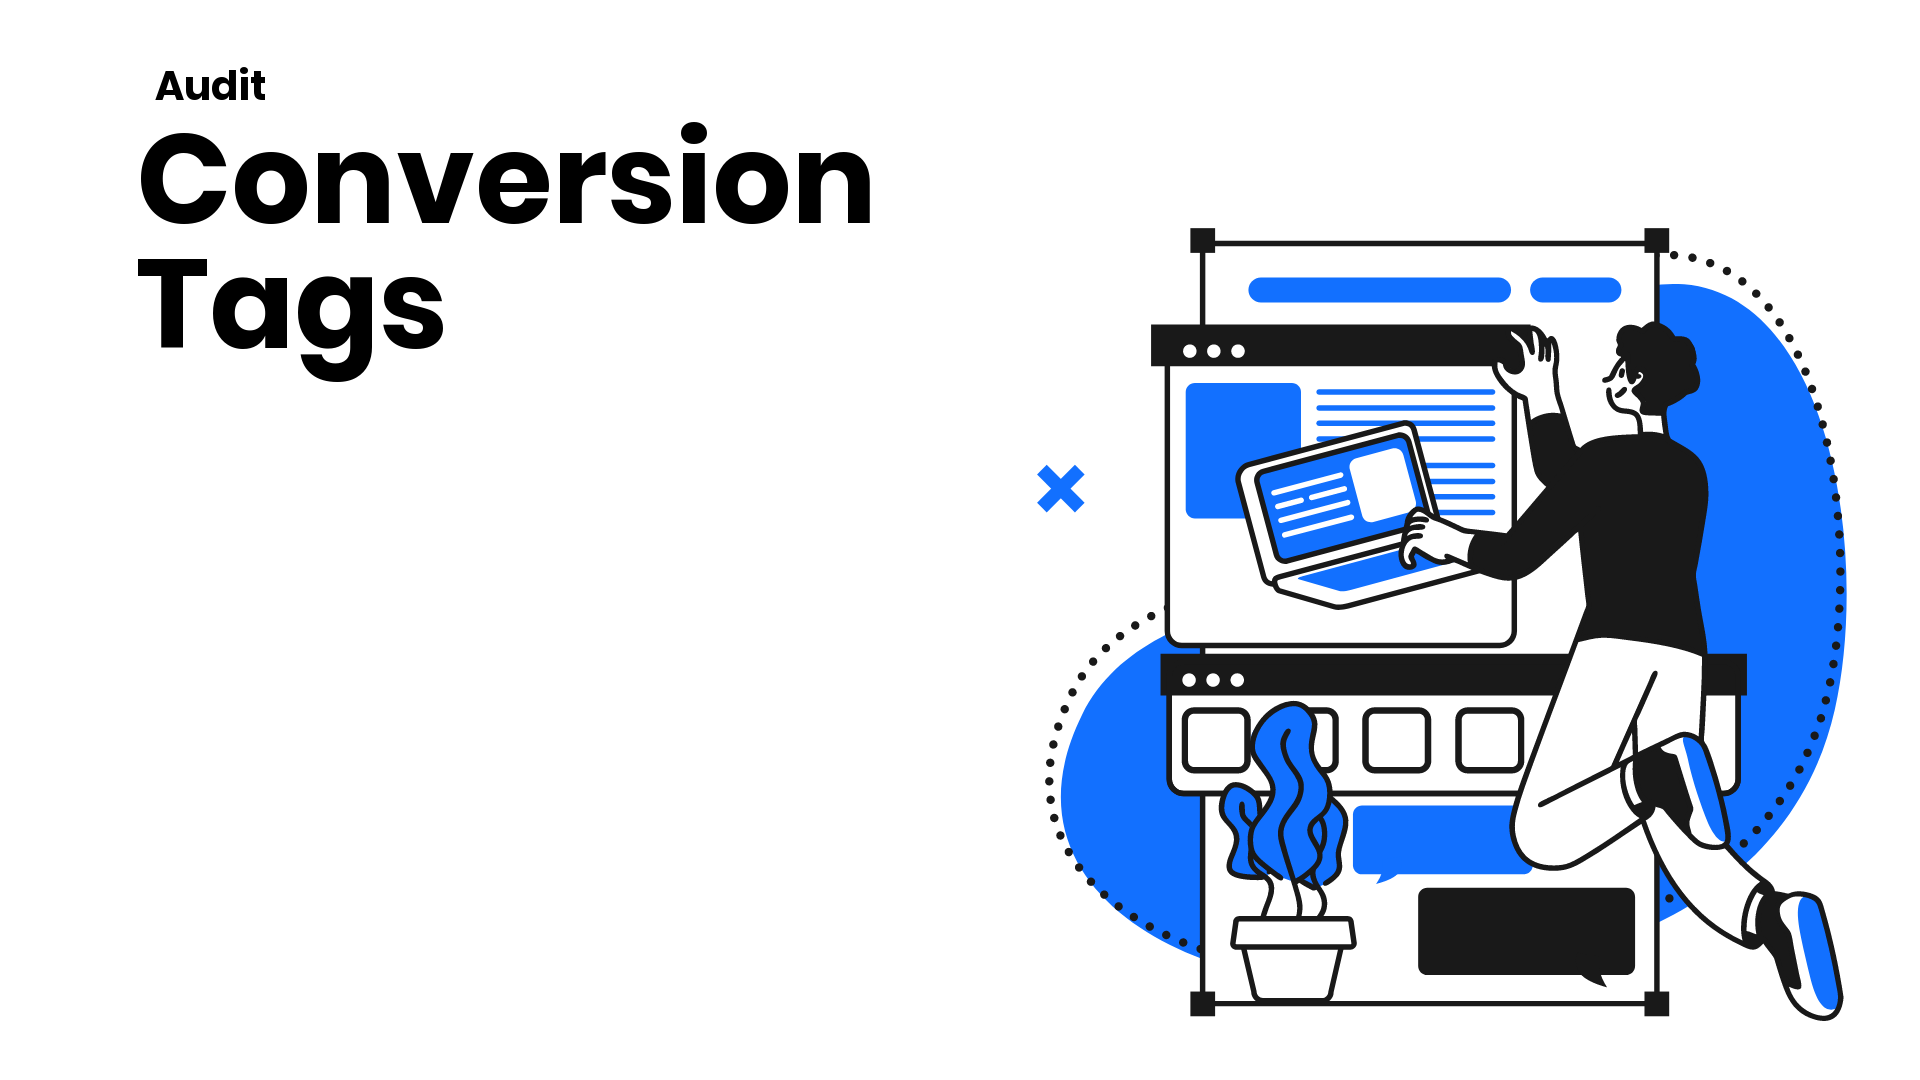 How to audit Conversion Tags in Google Ads